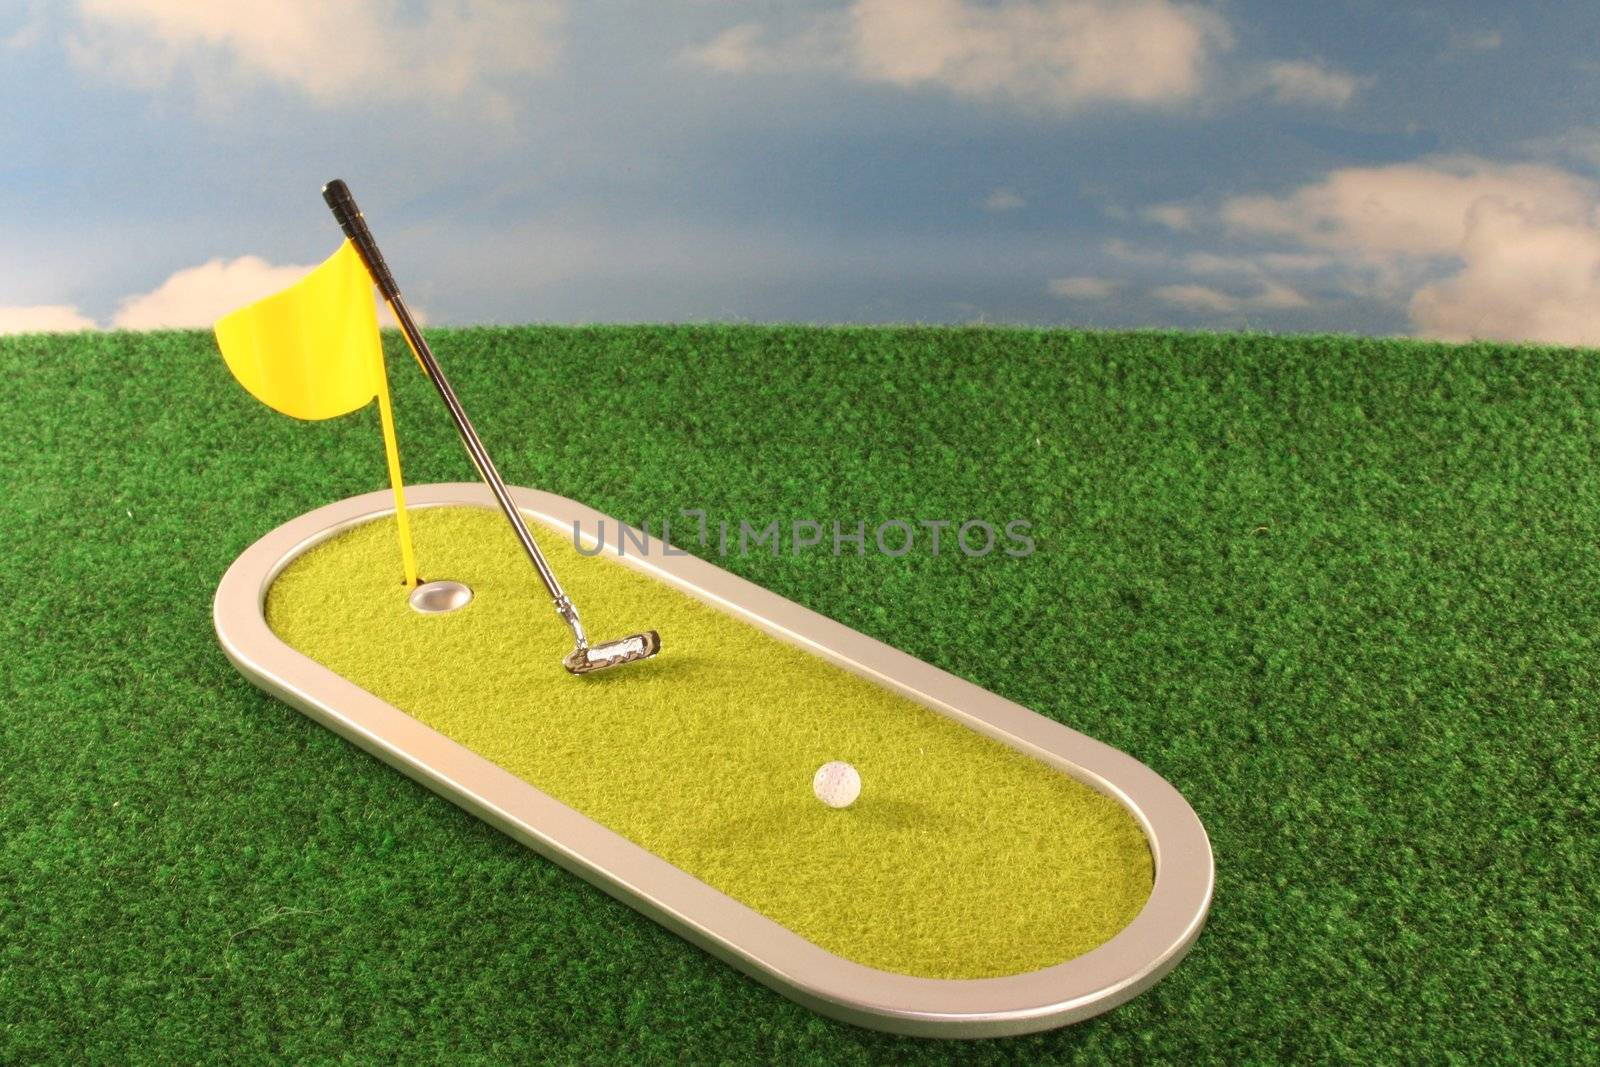 Golf game with putter, golf ball and a flag on the lawn before a blue sky